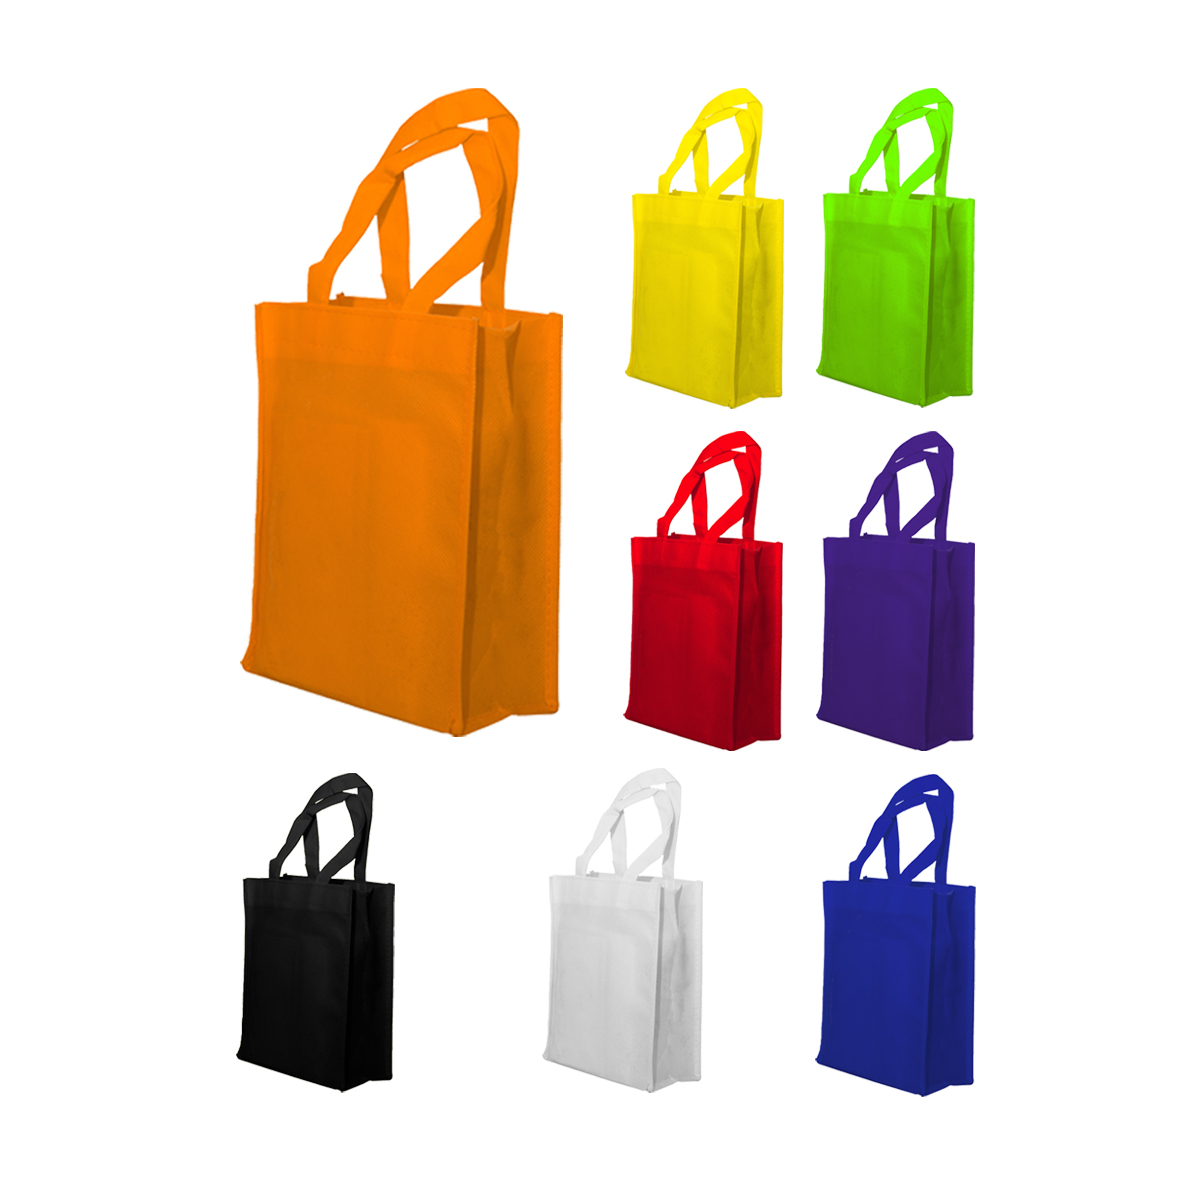 A5 Non-Woven Bag Printing | Eco Friendly Corporate Gifts SG